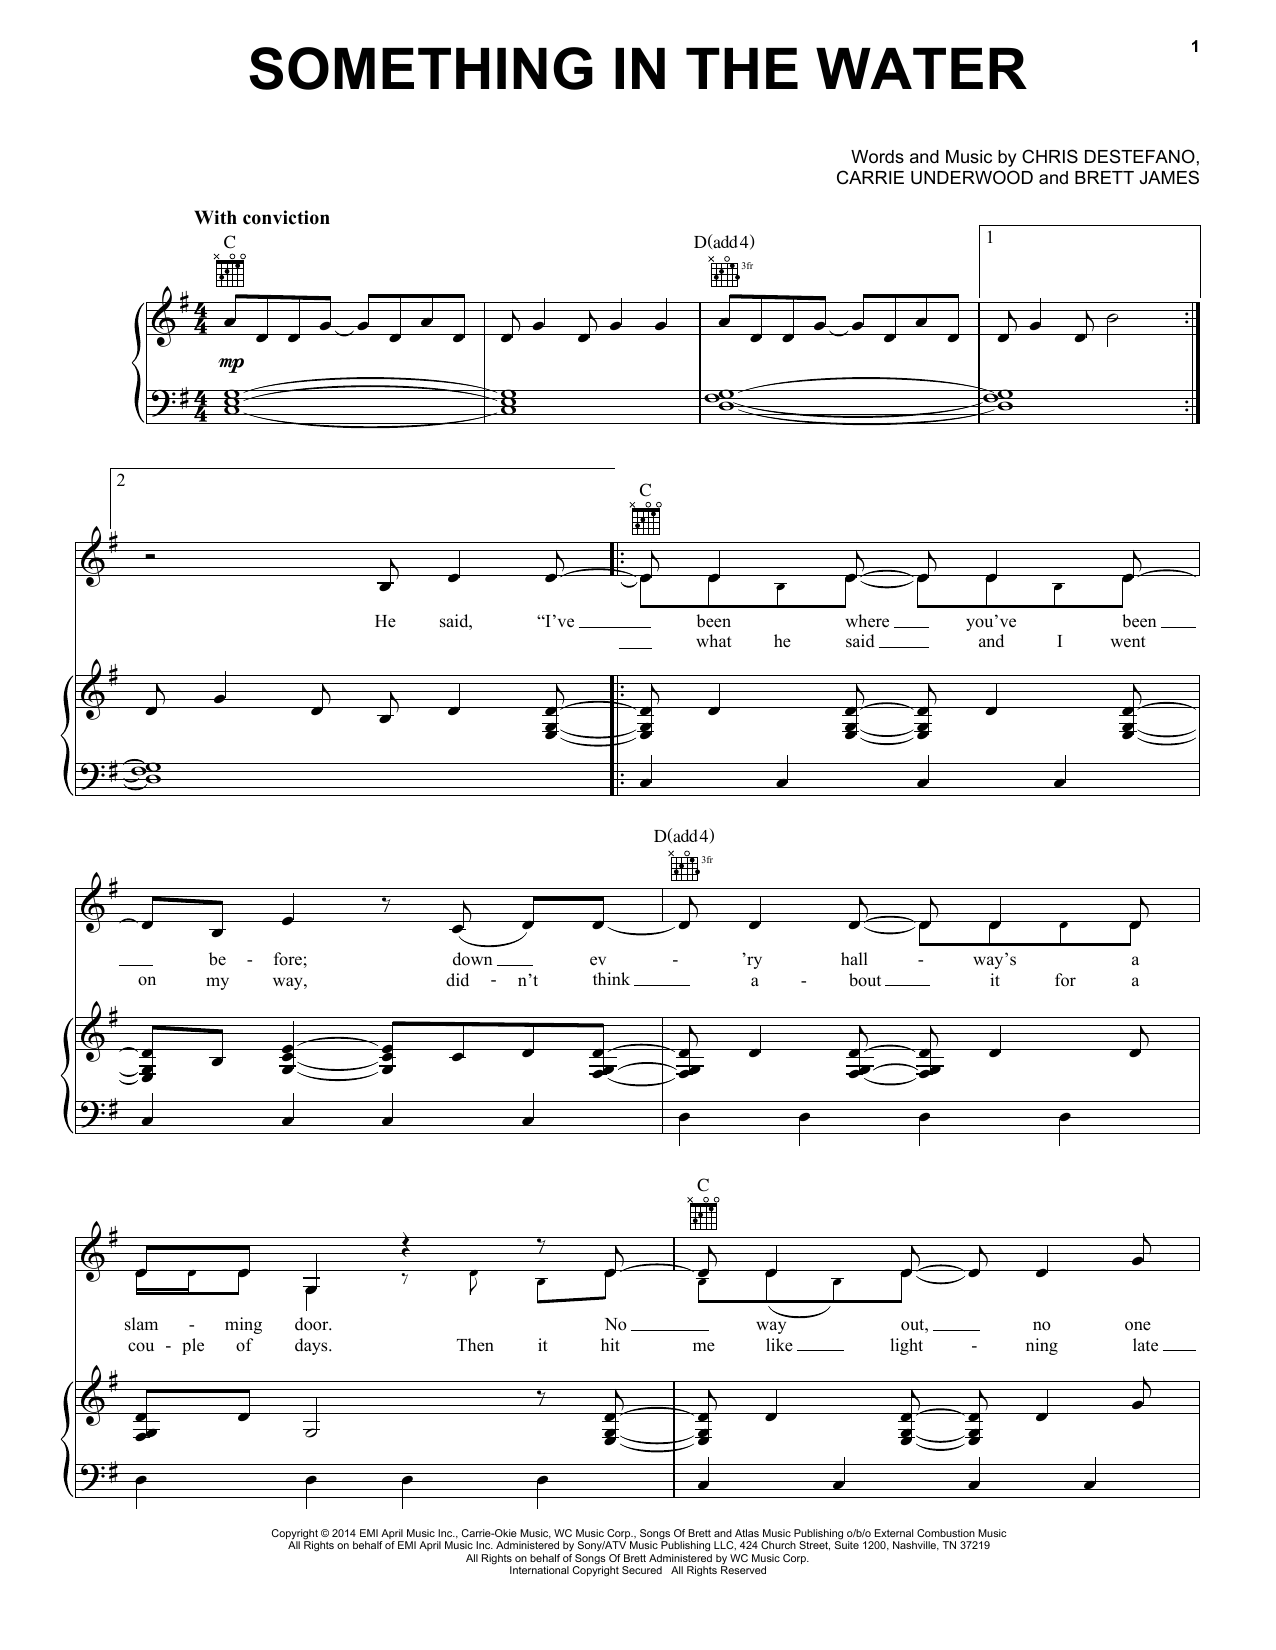 Download Carrie Underwood Something In The Water Sheet Music